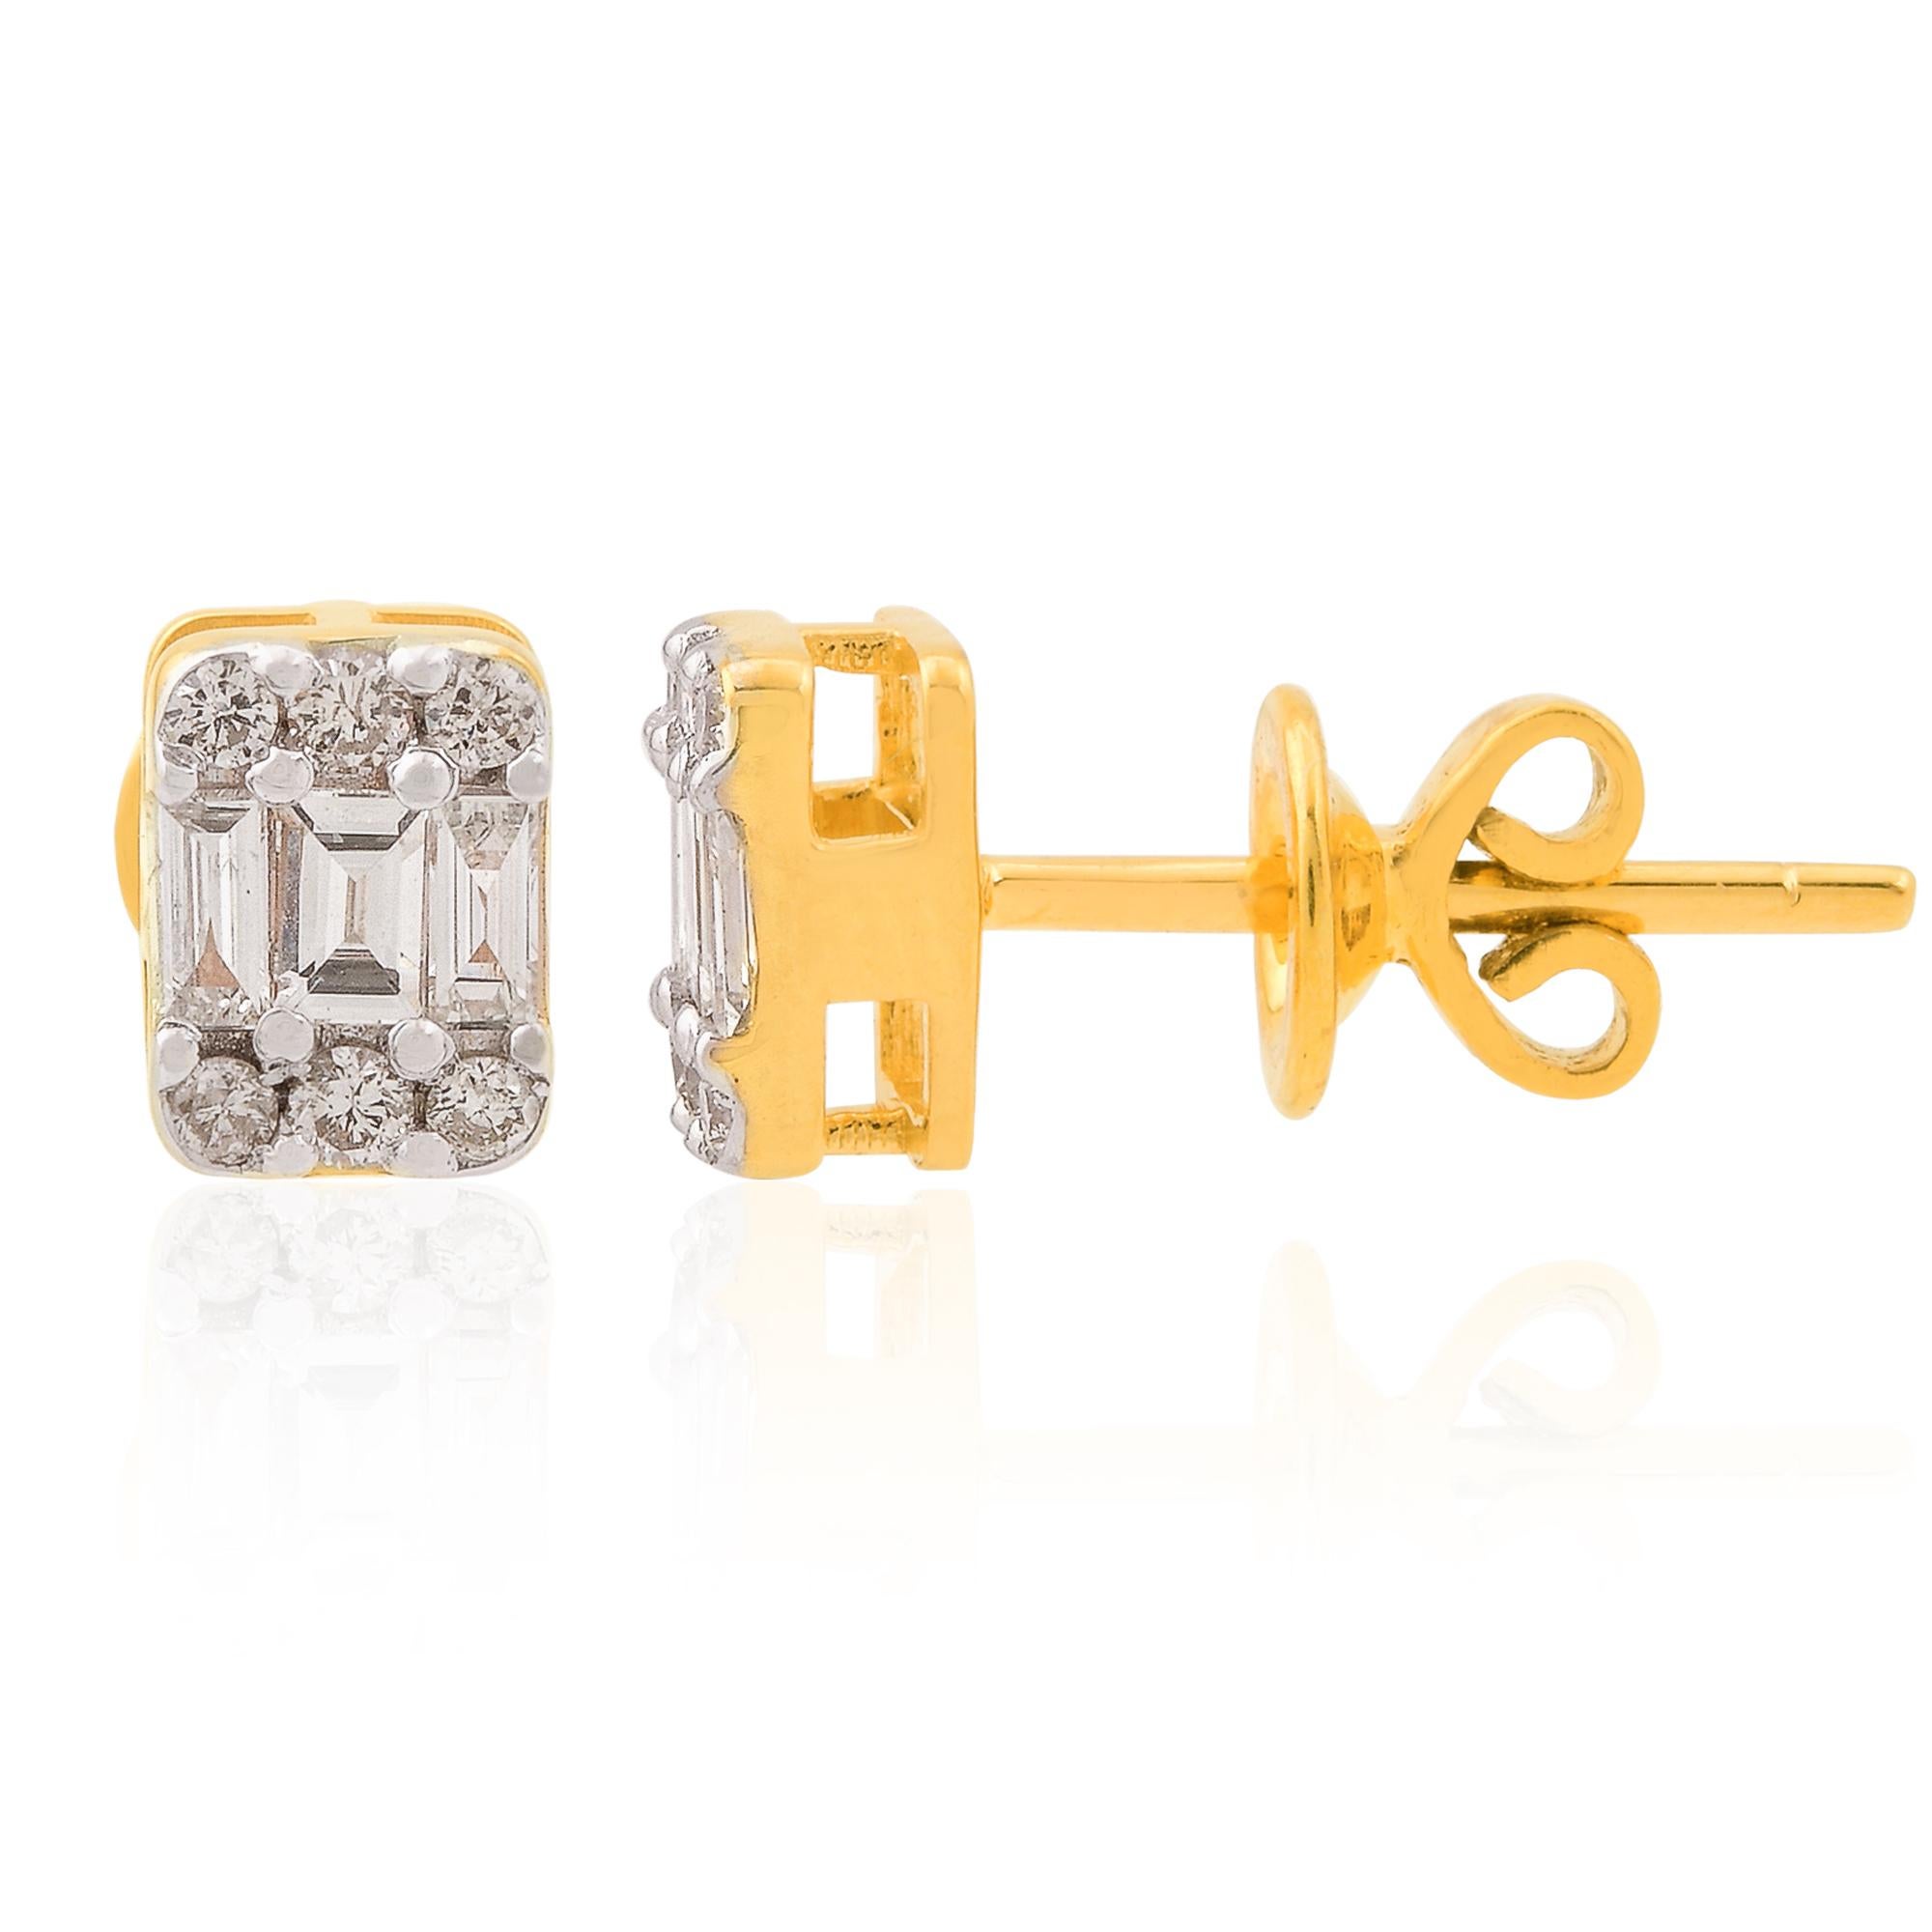 Item Code:- STE-1192
Gross Weight :- 1.63 gm
10k Solid Yellow Gold Weight :- 1.56 gm
Natural Diamond Weight :- 0.33 carat  ( AVERAGE DIAMOND CLARITY SI1-SI2 & COLOR H-I )
Earrings Size :- 7x5 mm approx.

✦ Sizing
.....................
We can adjust